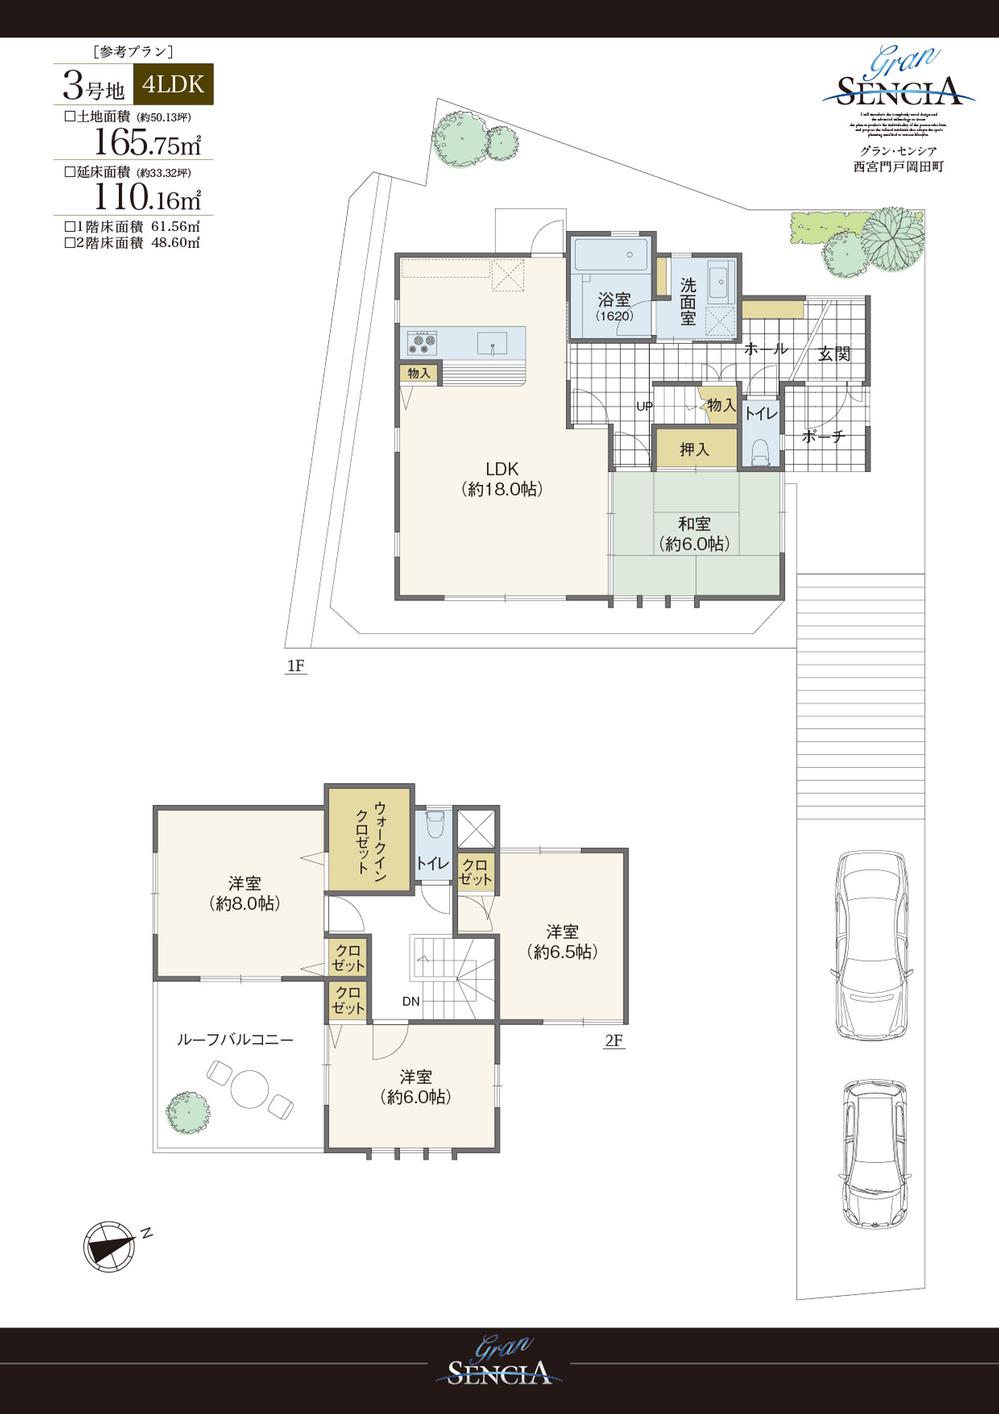 Compartment view + building plan example. Building plan example (No. 3 land reference plan) 4LDK, Land price 40,980,000 yen, Land area 165.75 sq m , Building price 17,820,000 yen, Building area 110.16 sq m